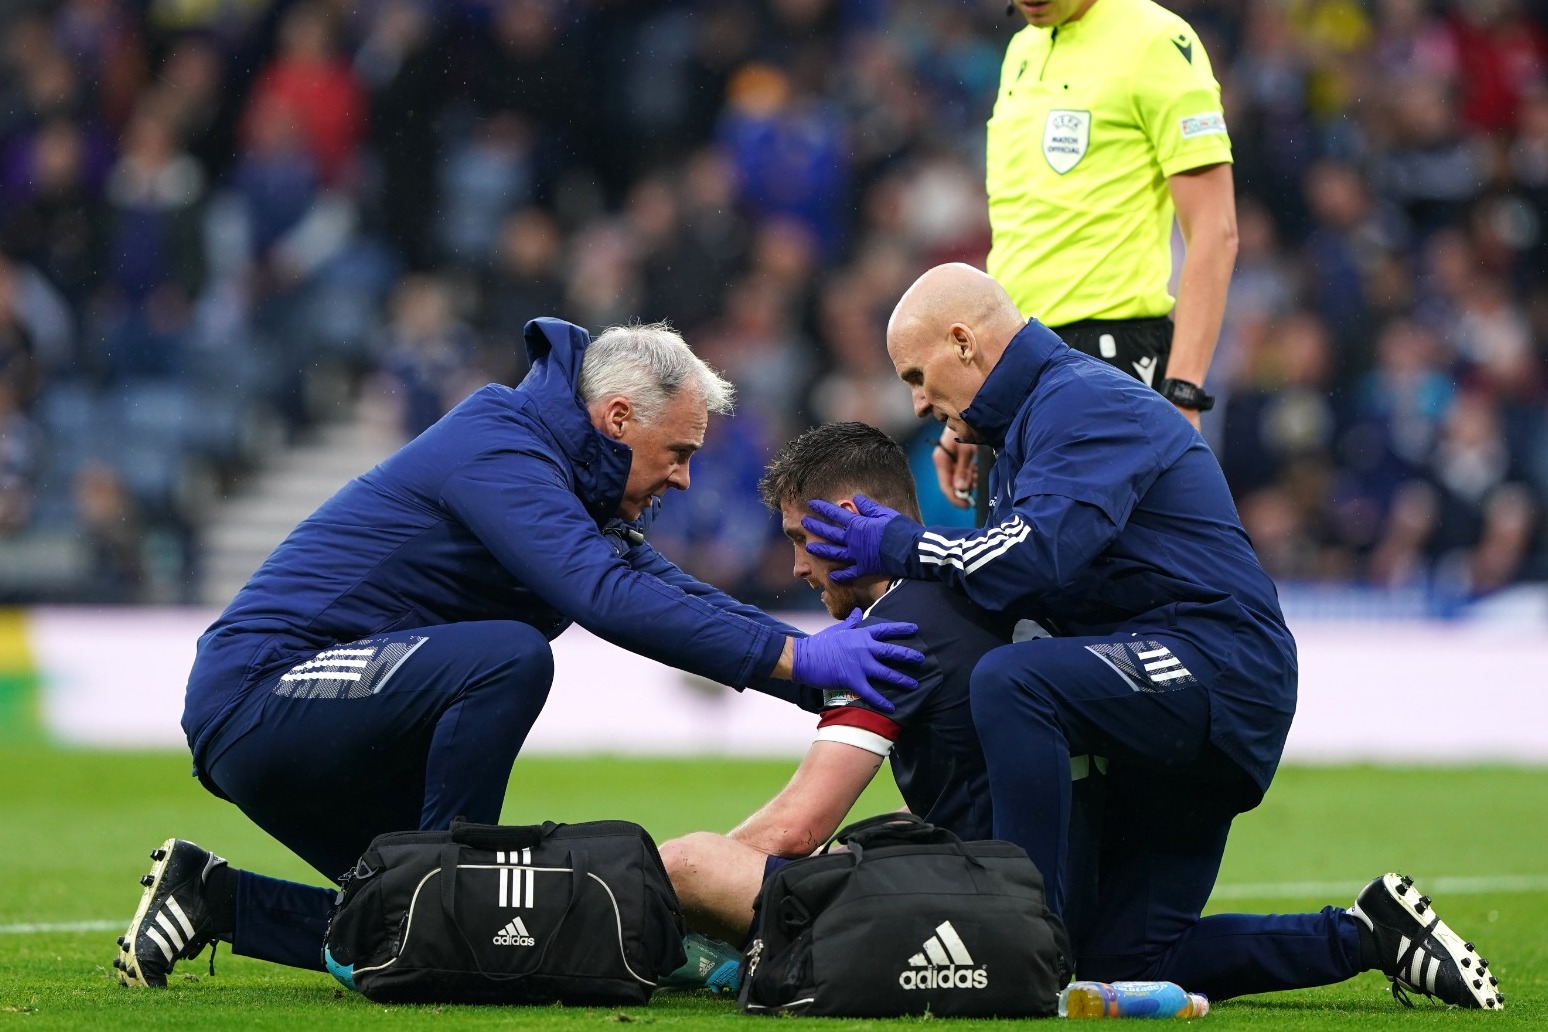 Football’s law-makers urged to introduce temporary concussion substitutions 